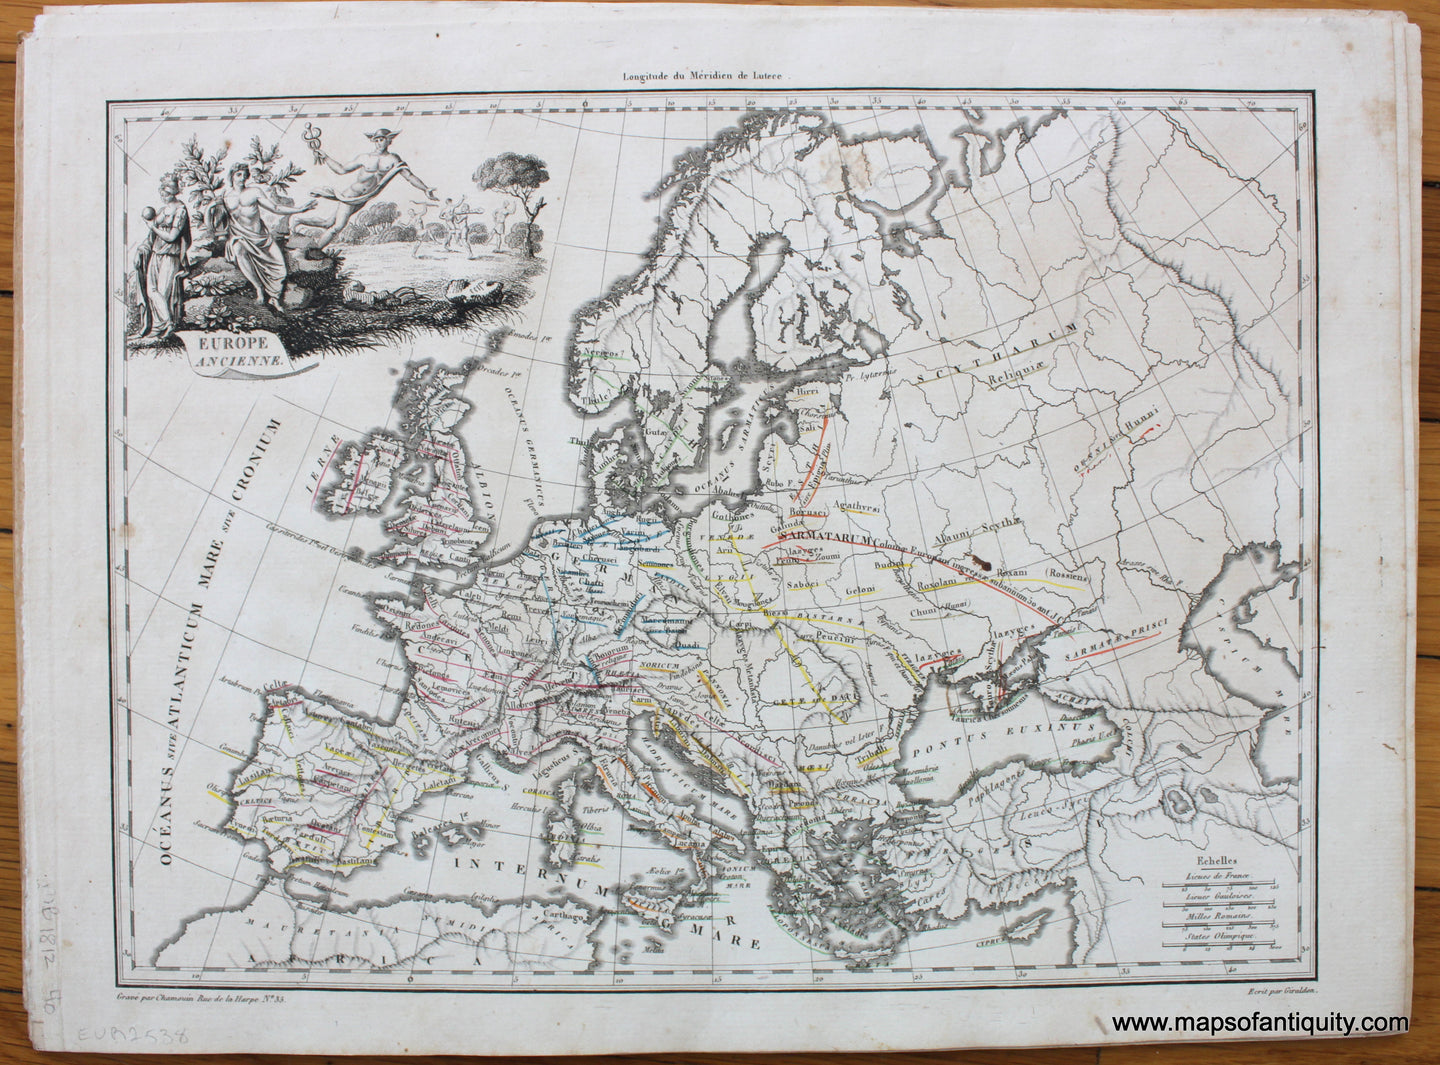 Antique-Hand-Colored-Map-Europe-Ancienne-Ancient-Europe-1812-Malte-Brun-Lapie-1800s-19th-century-Maps-of-Antiquity